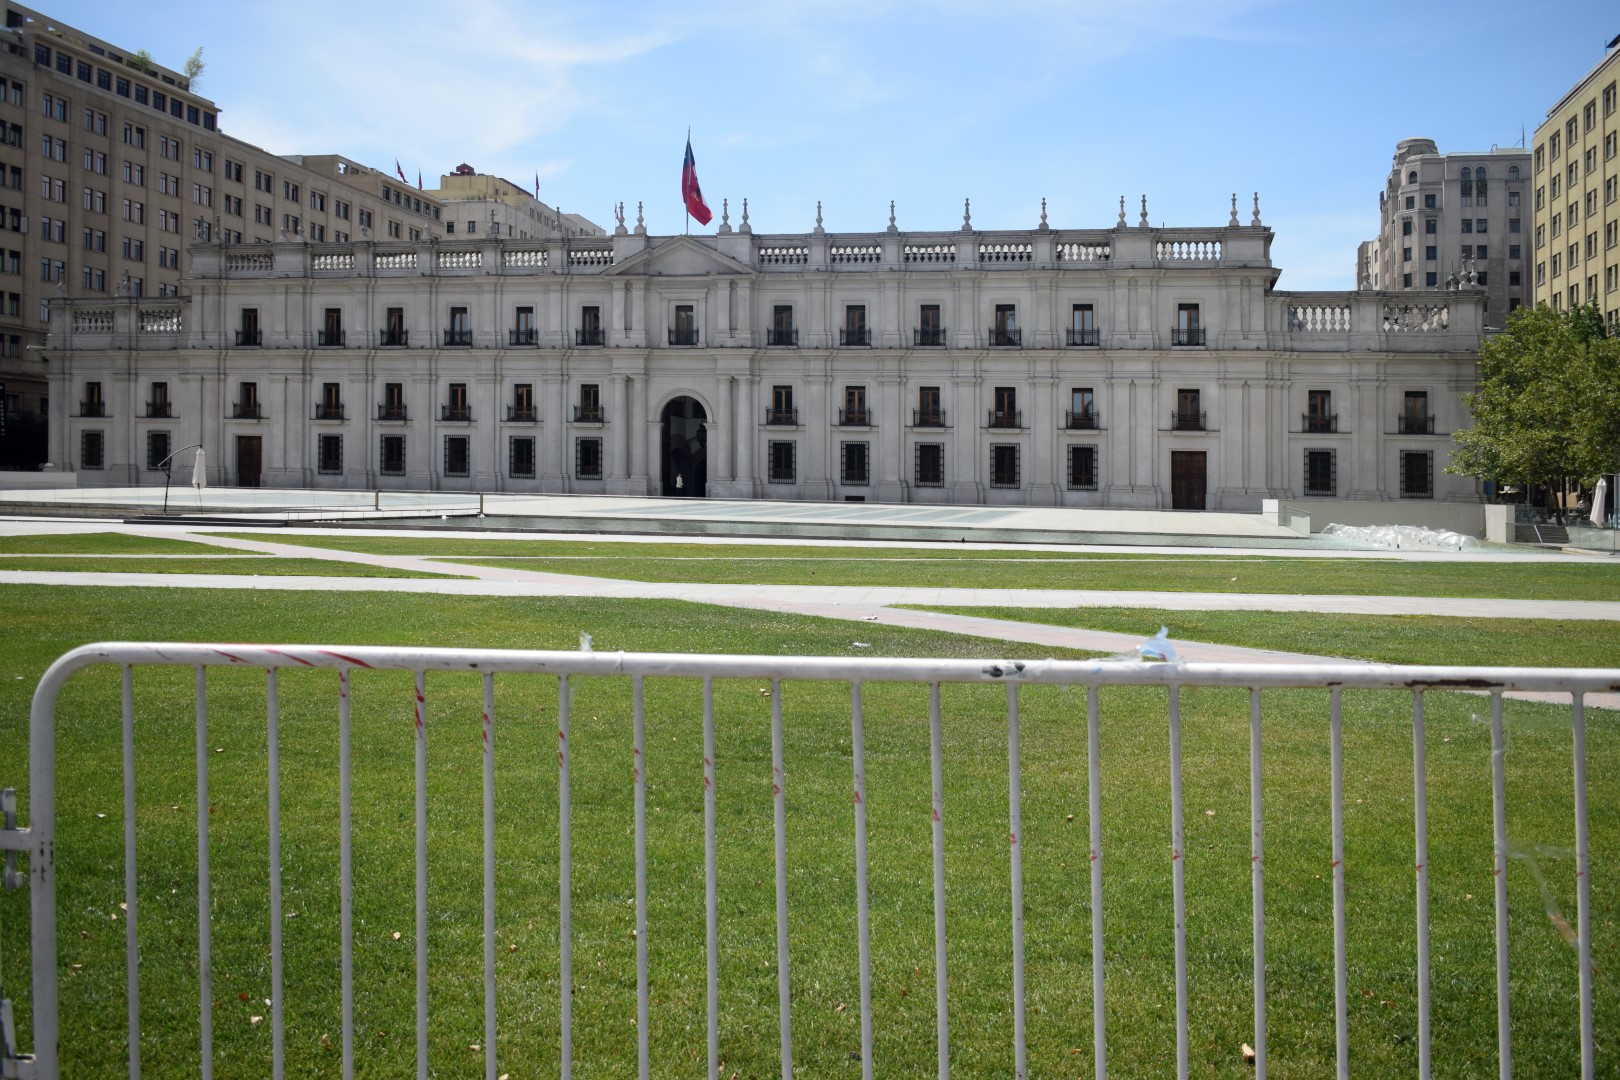 Meanwhile, La Moneda, seat of the President of the Republic of Chile, is still standing... but fenced off